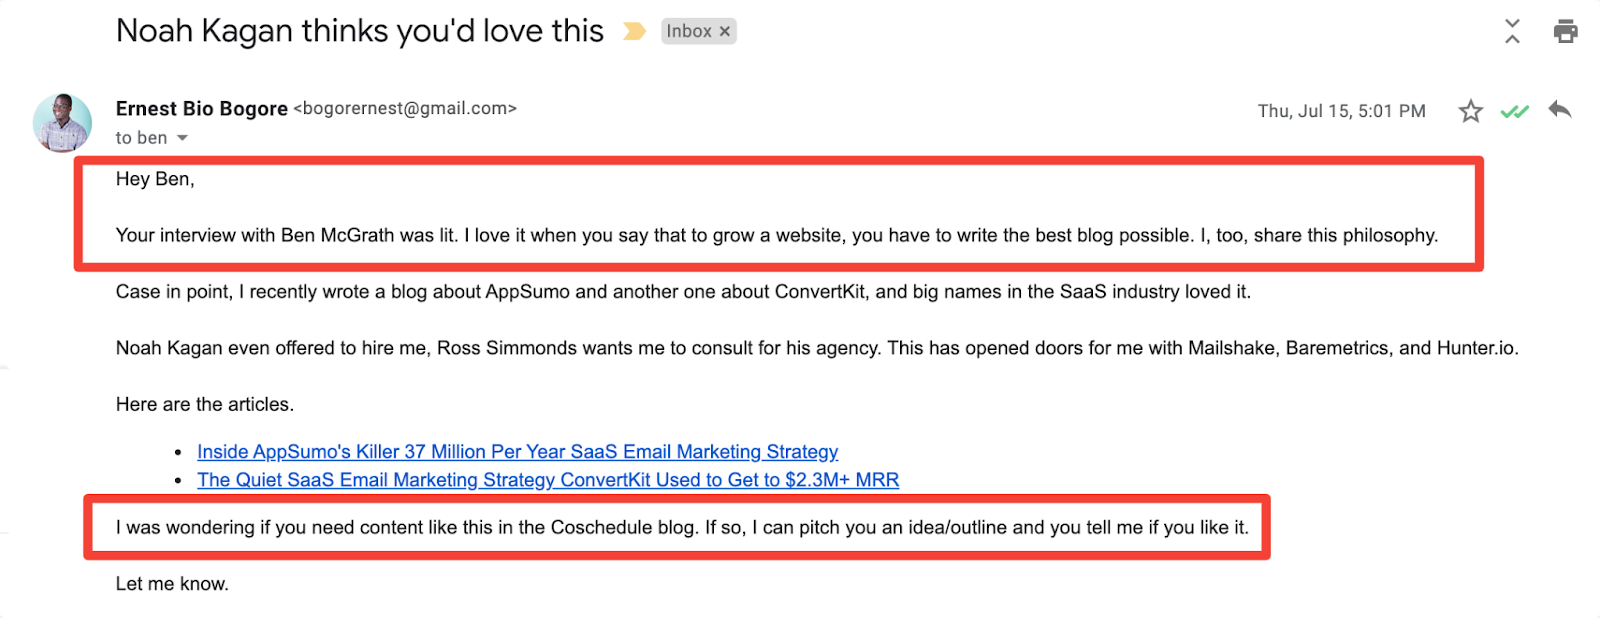 Cold email outreach tactics done right